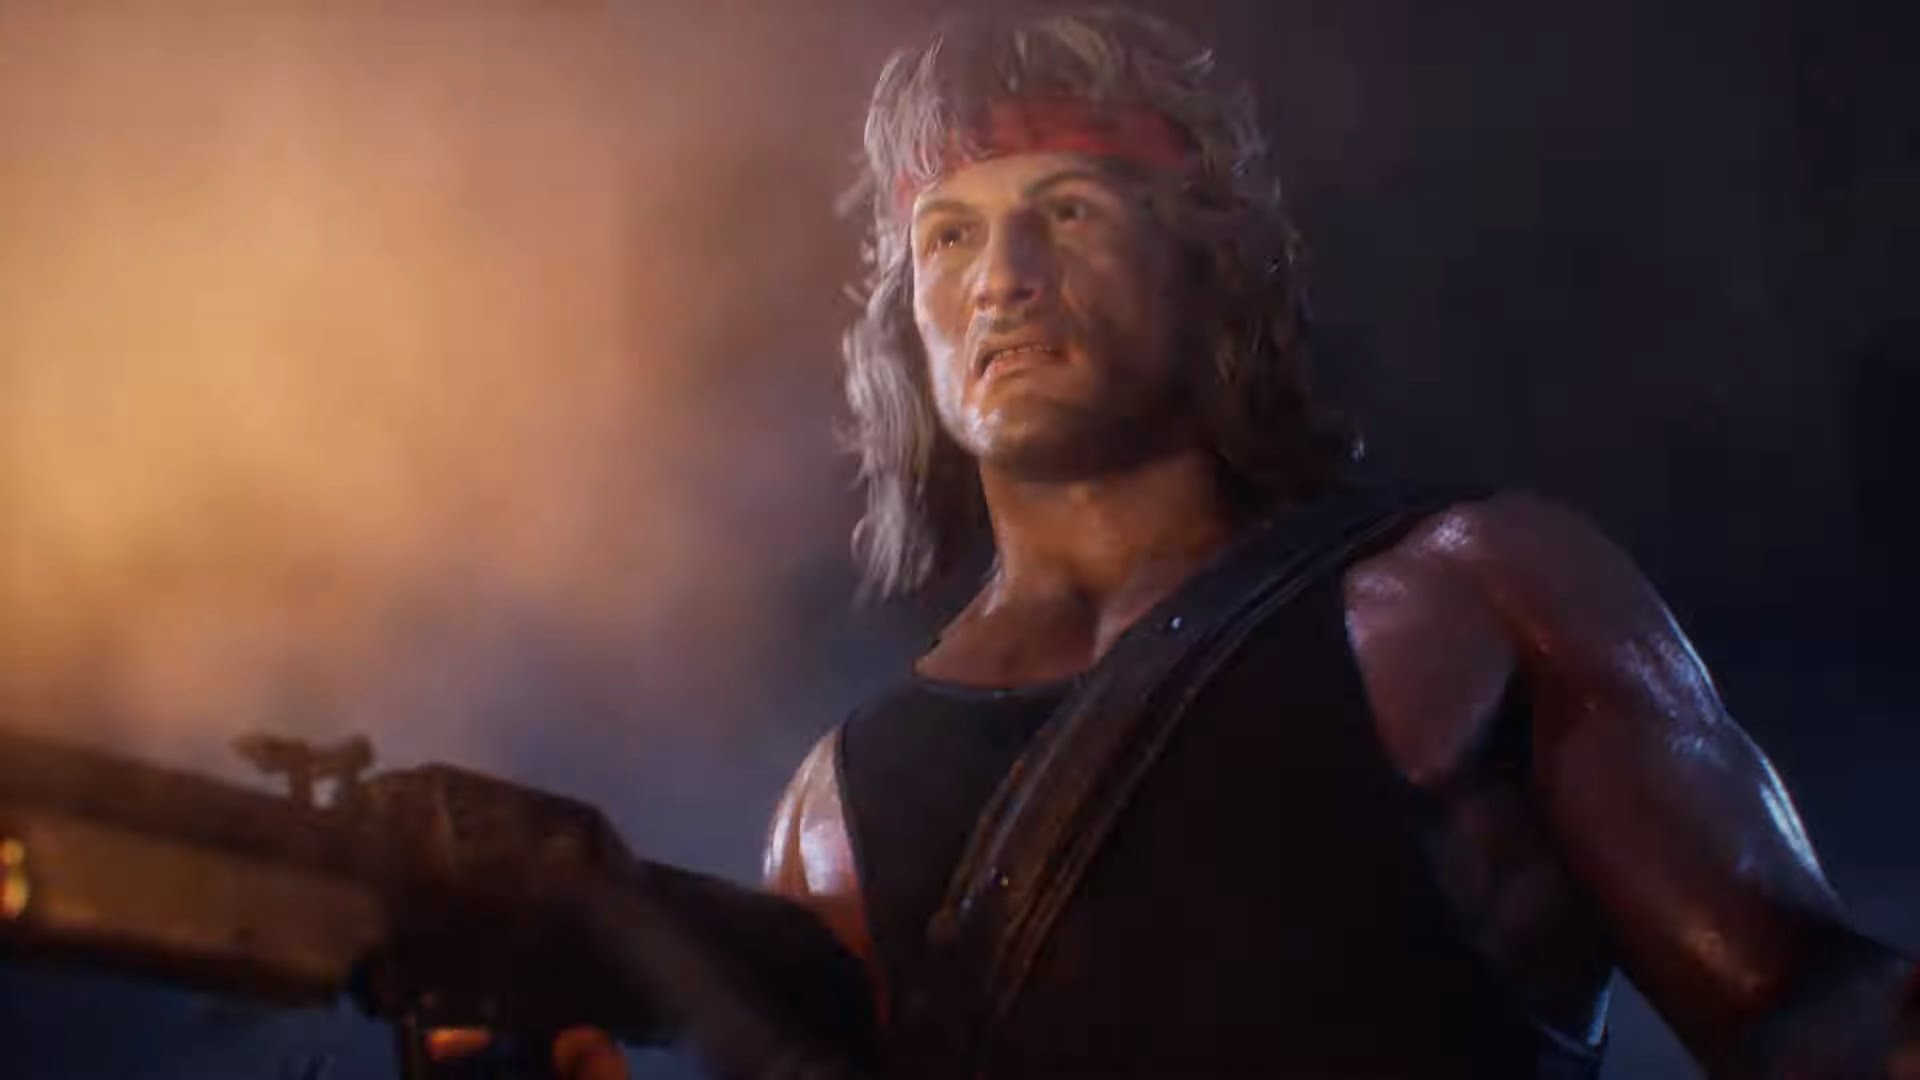 May 20, Rambo Released For Call Of Duty Warzone (mortal Kombat 11 Illustration)